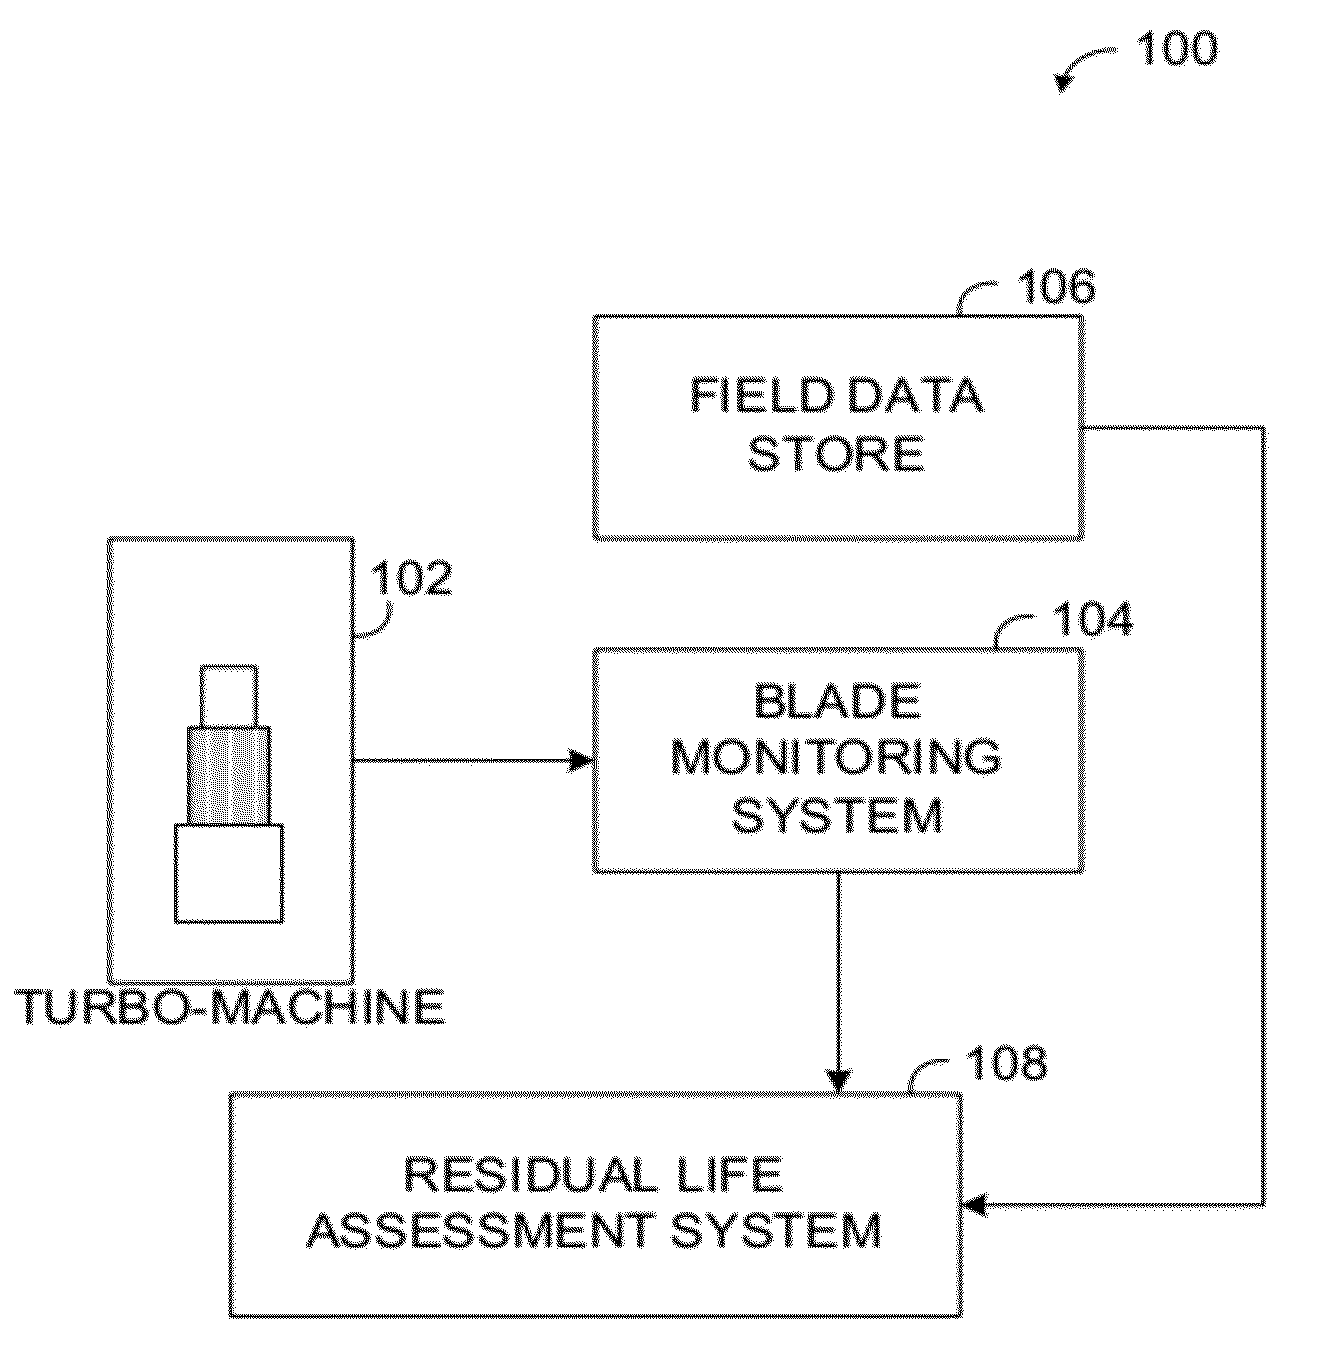 Methods and systems for assessing residual life of turbomachine airfoils